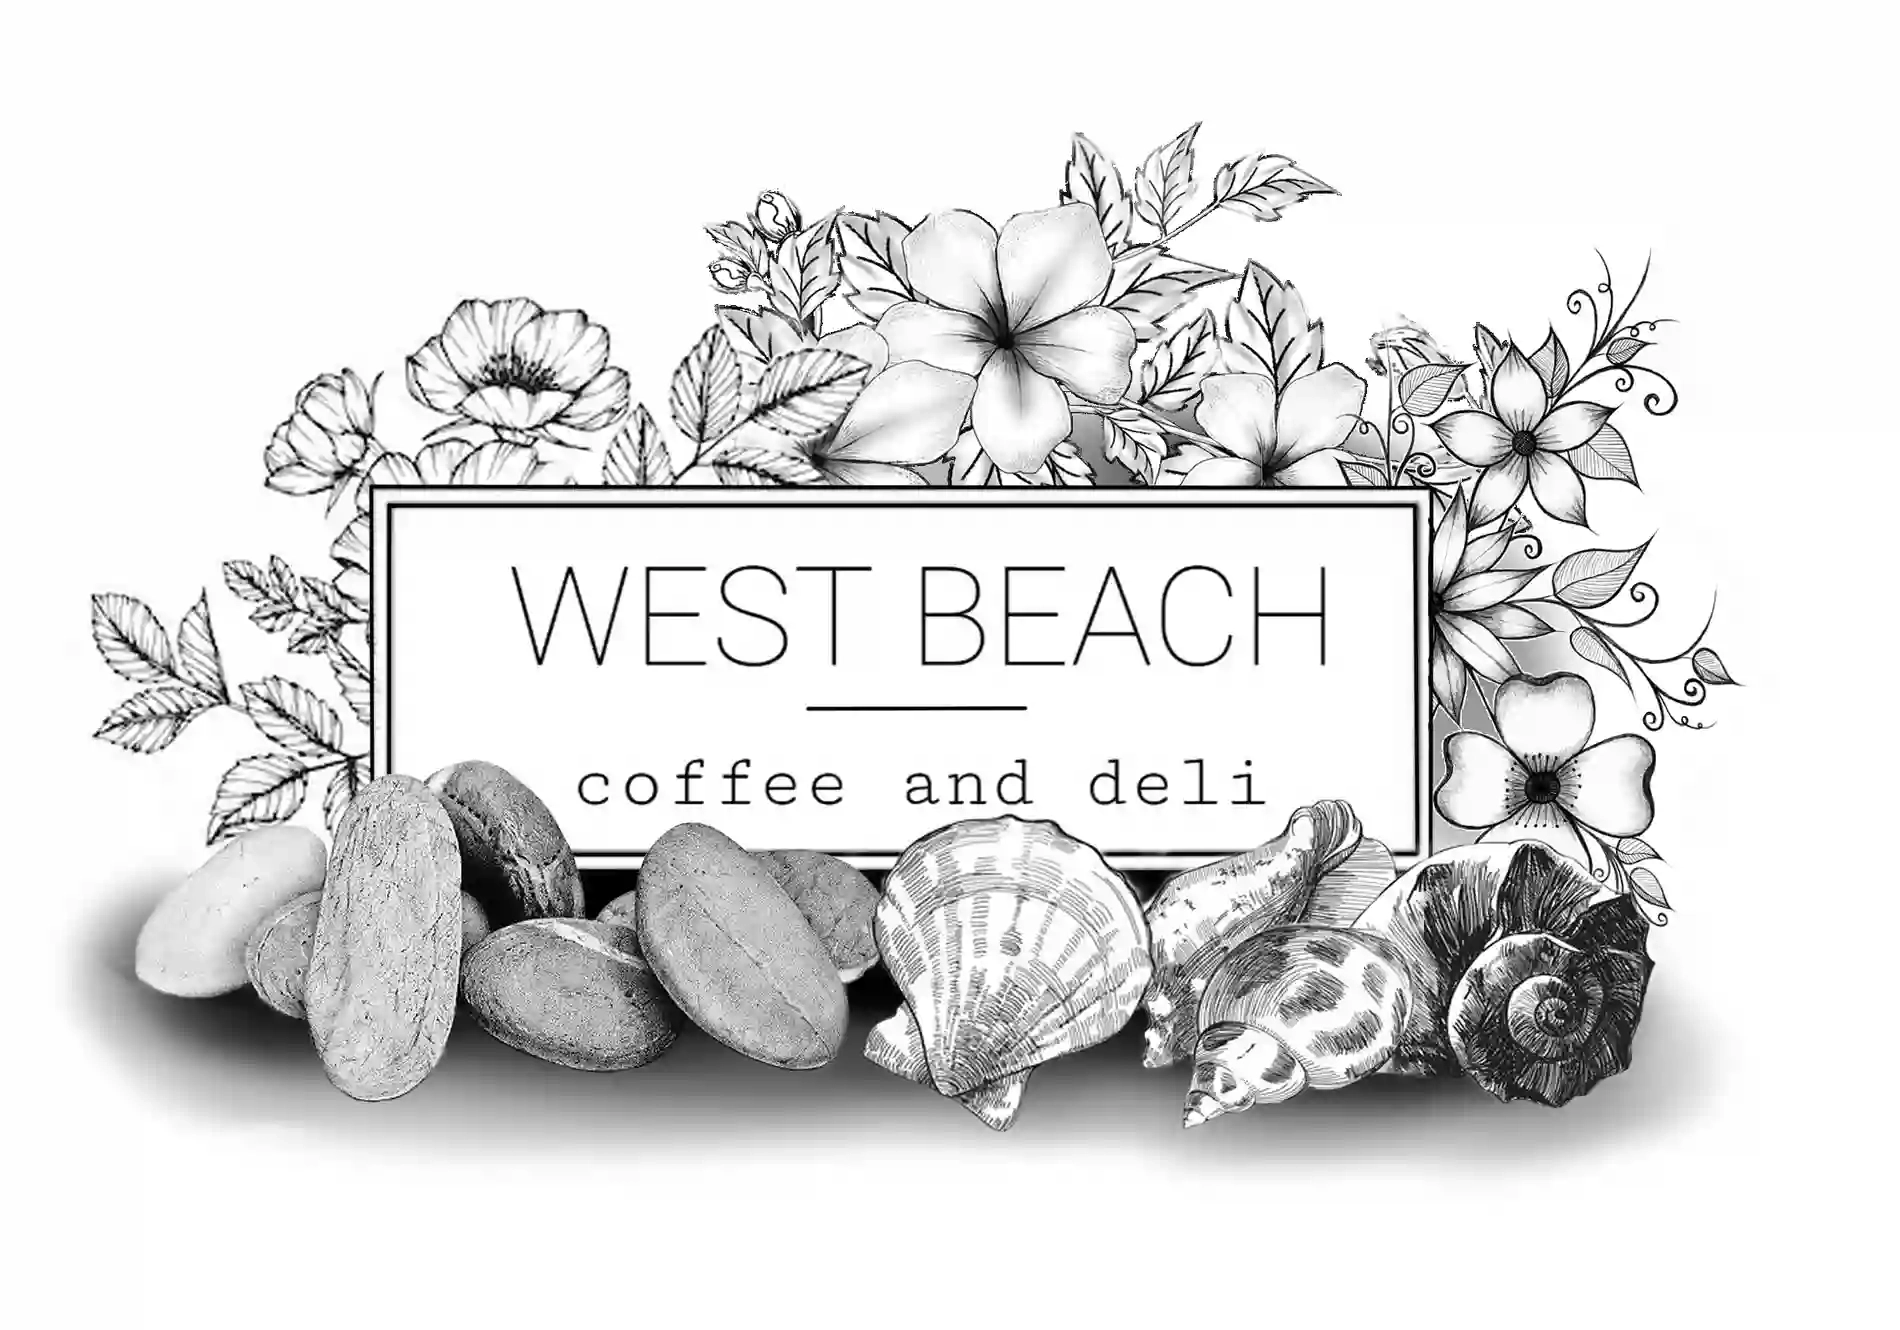 West Beach coffee and deli